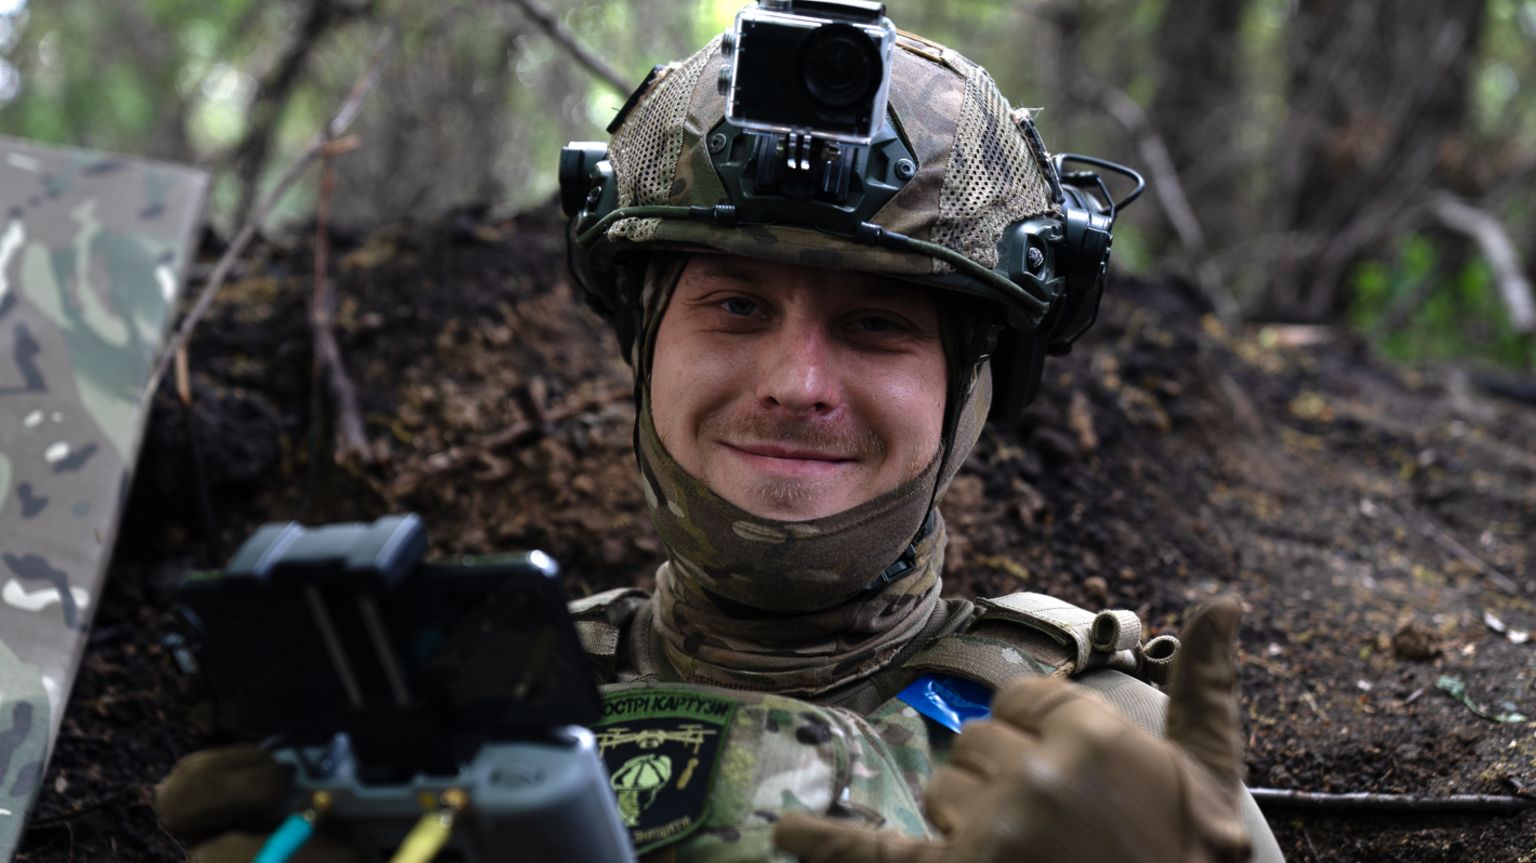 A smiling soldier